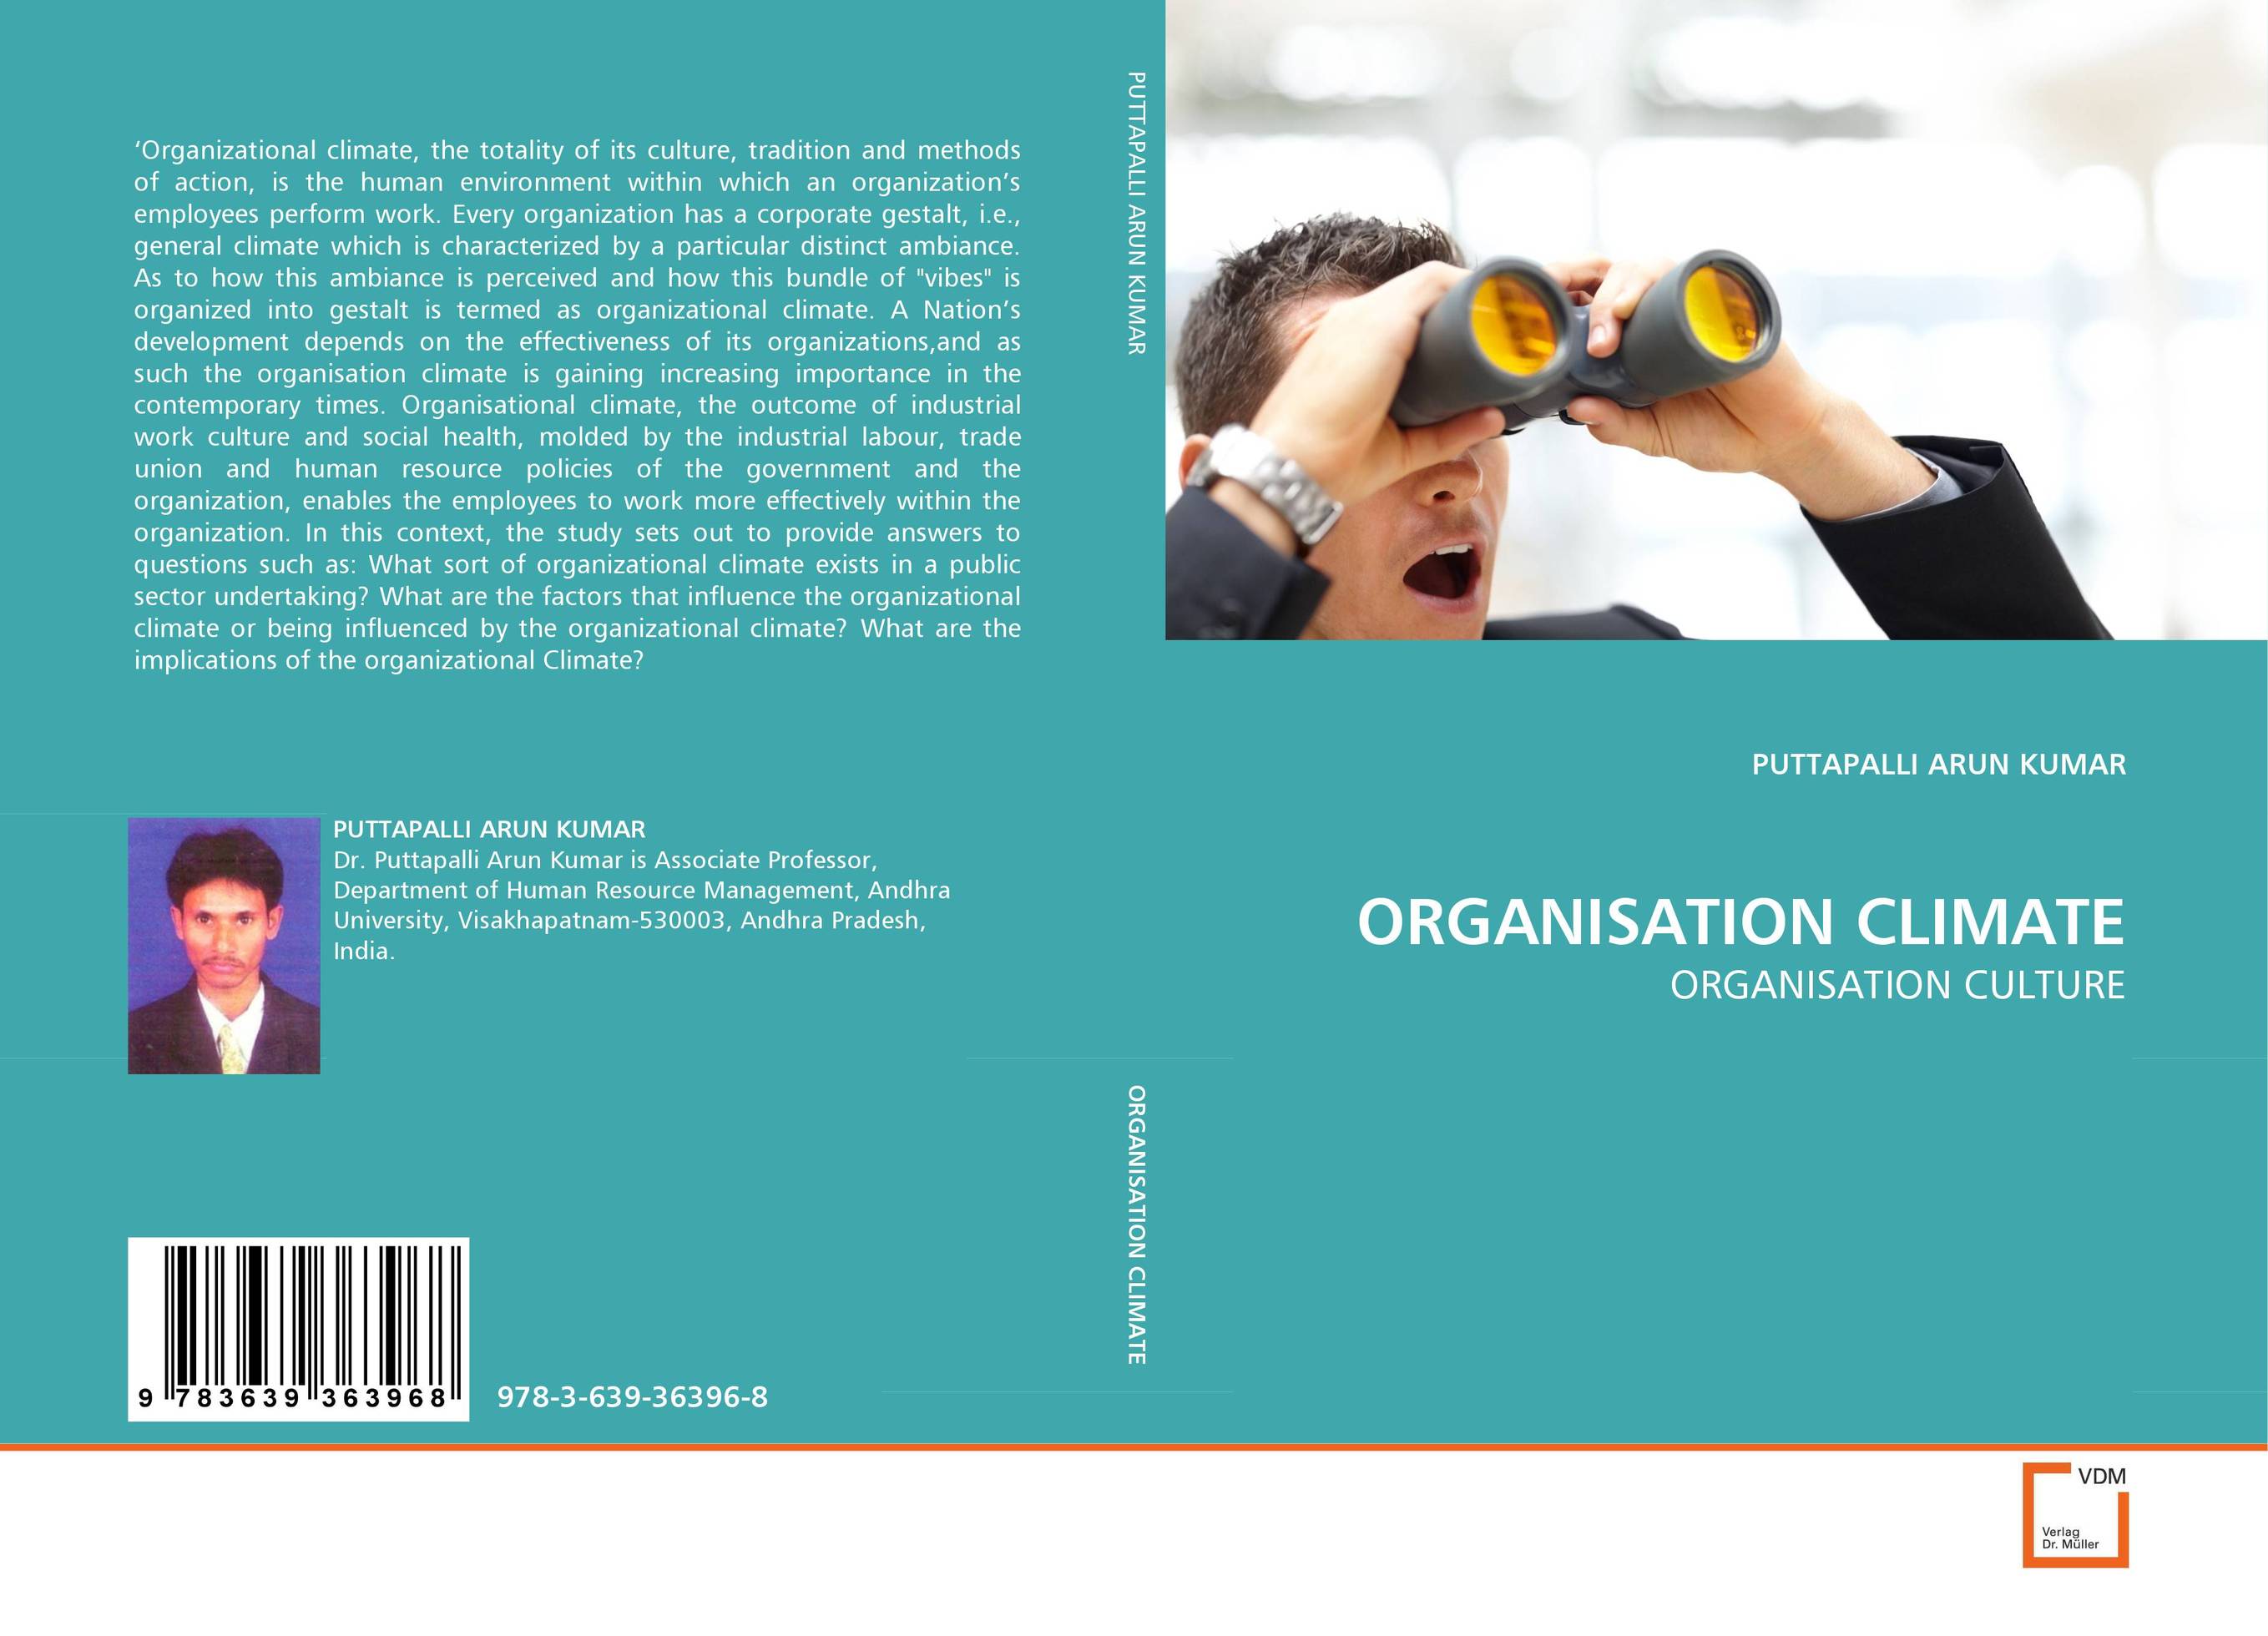 ORGANISATION CLIMATE